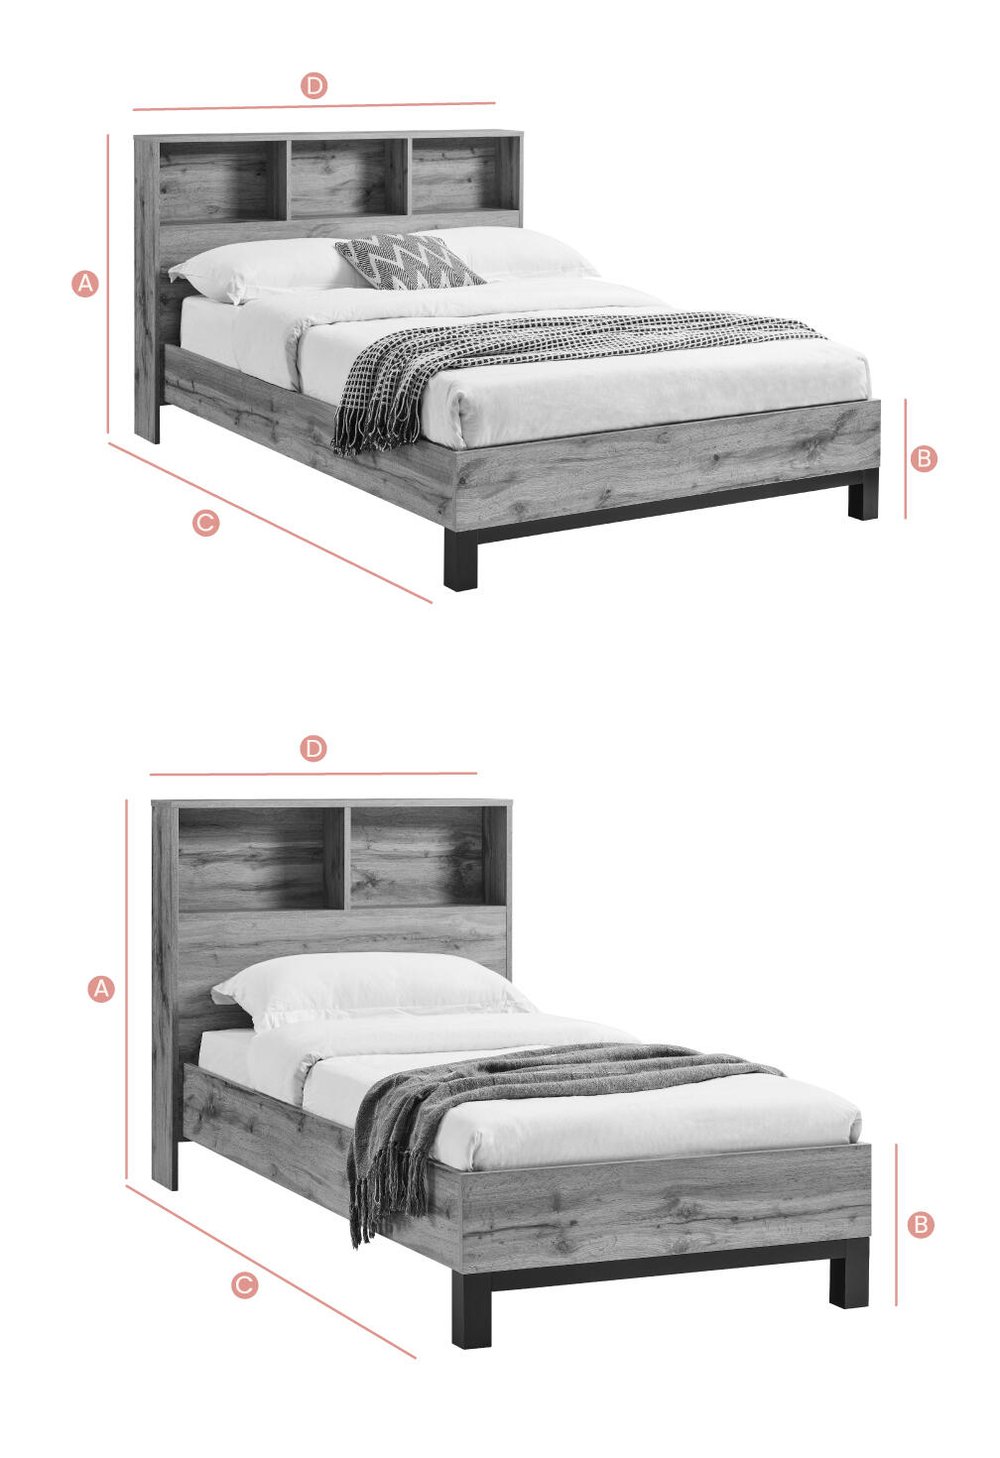 Happy Beds Bali Wooden Bed Sketch Dimensions